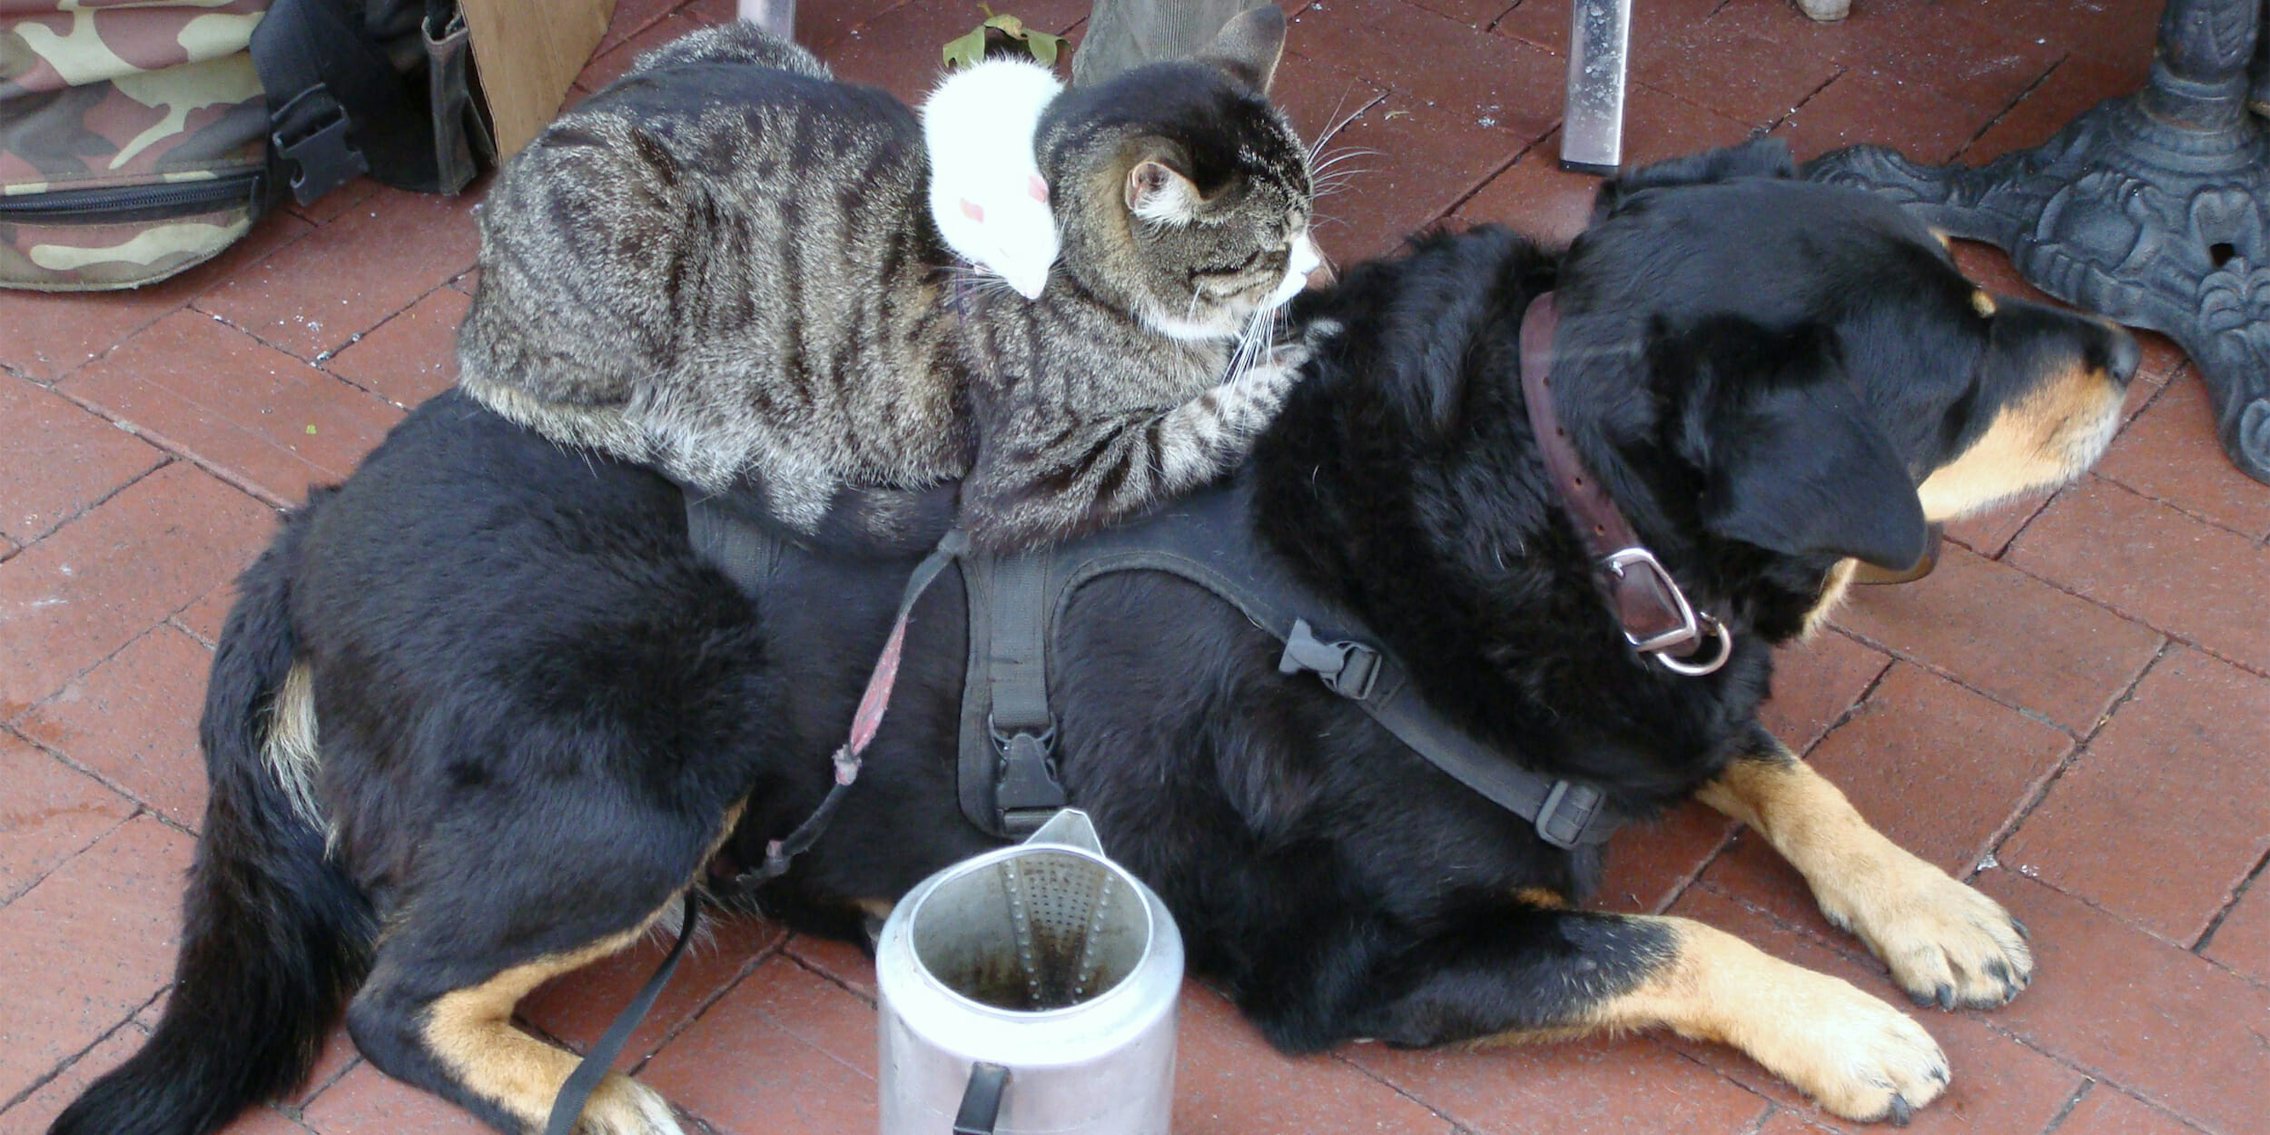 Rat on a cat on a dog woman cradles and protects child